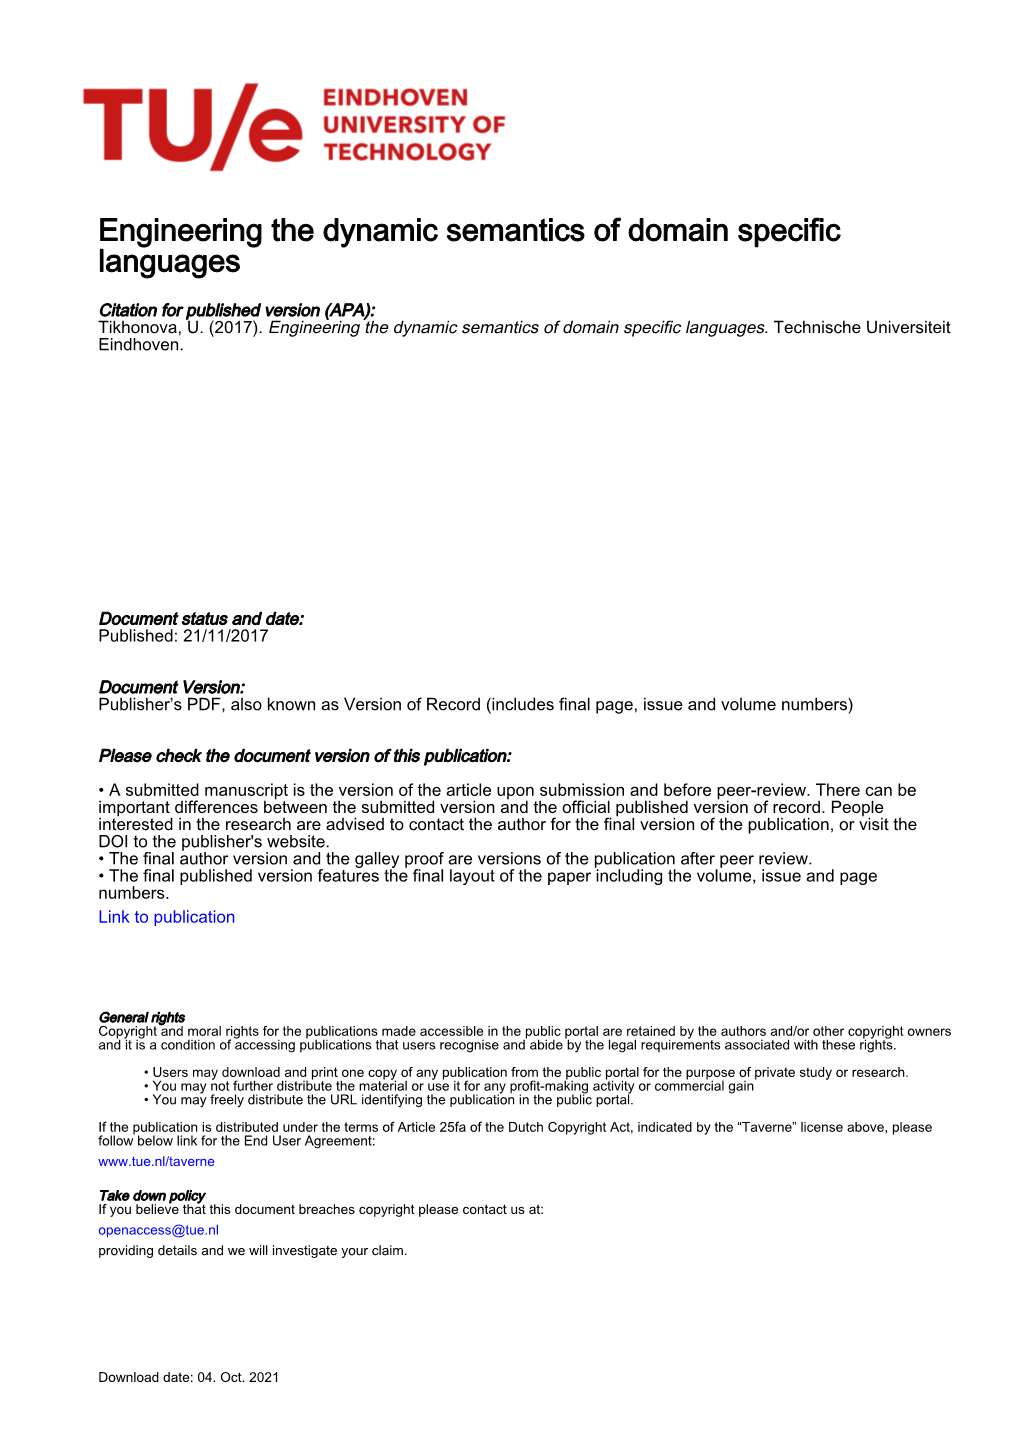 Engineering the Dynamic Semantics of Domain Specific Languages